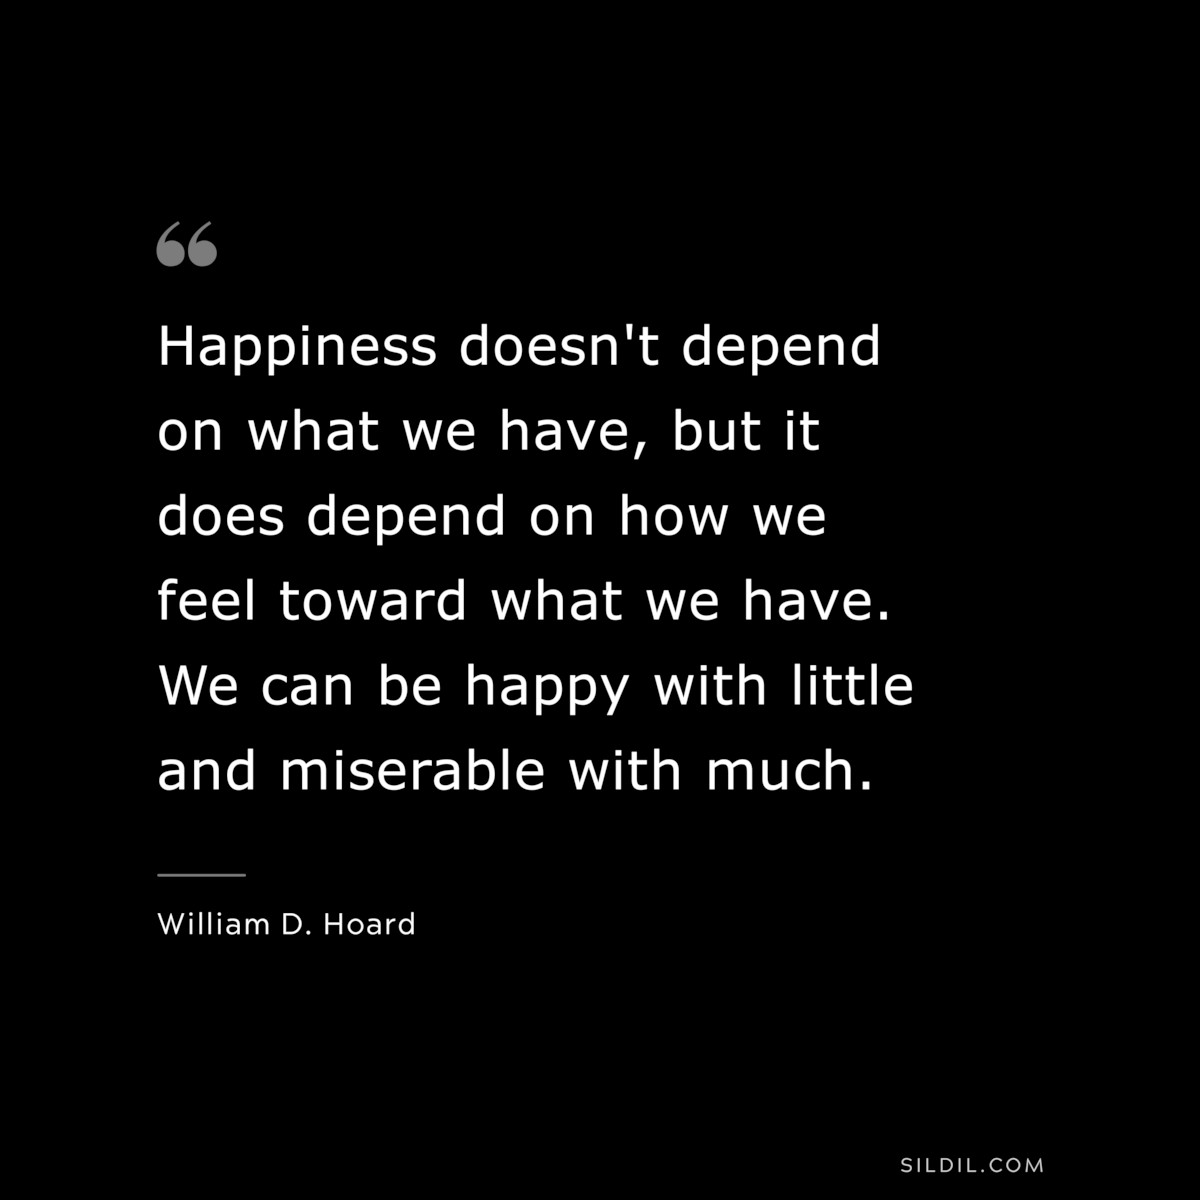 Happiness doesn't depend on what we have, but it does depend on how we feel toward what we have. We can be happy with little and miserable with much. ― William D. Hoard